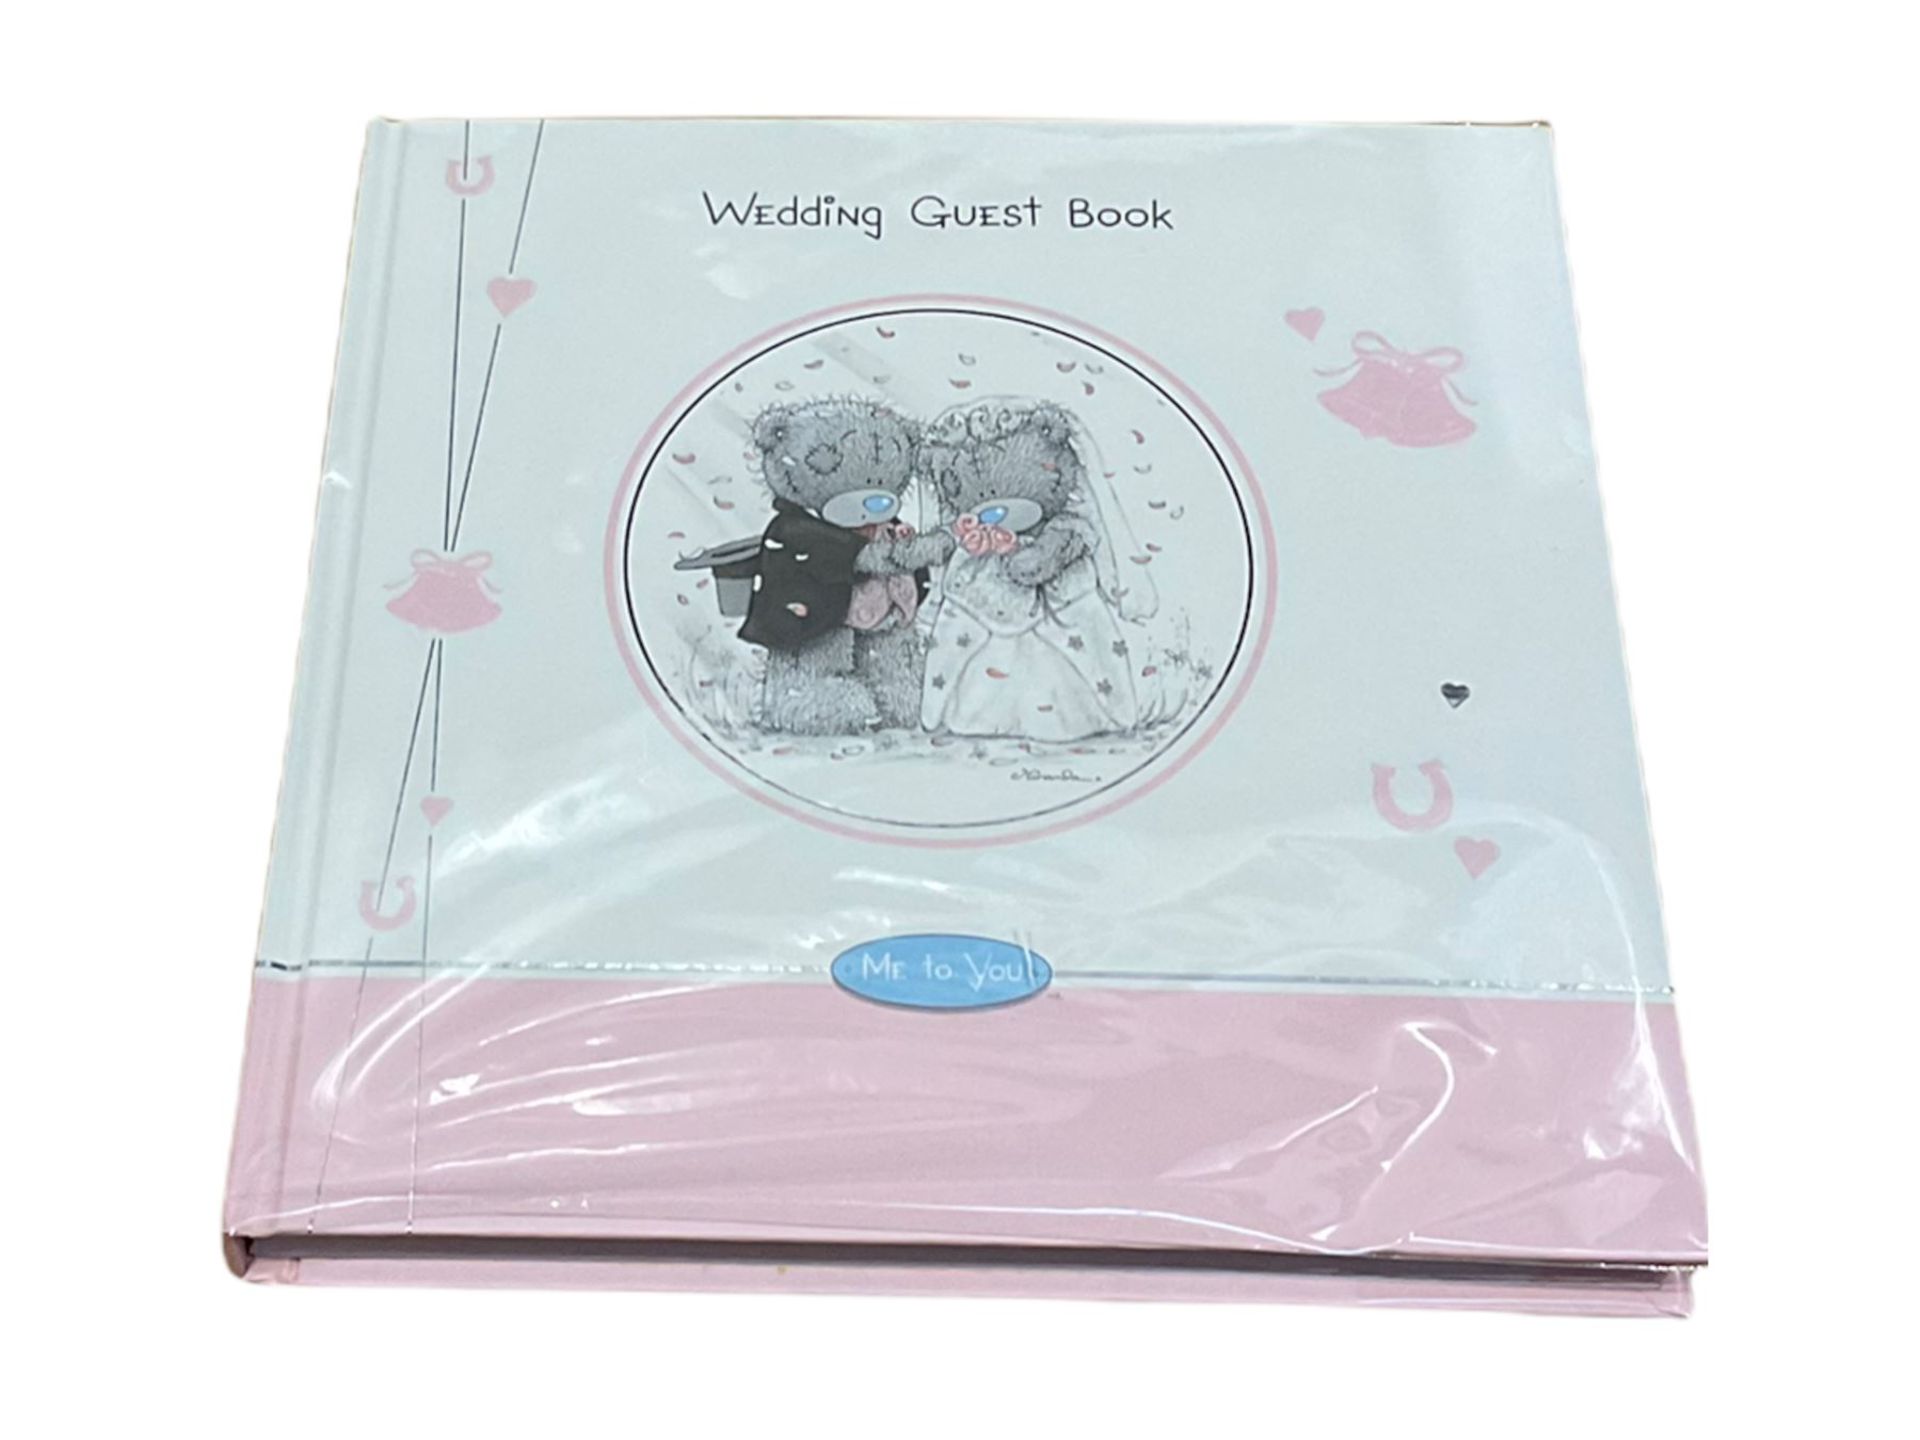 'Me to You' bears wedding guest books